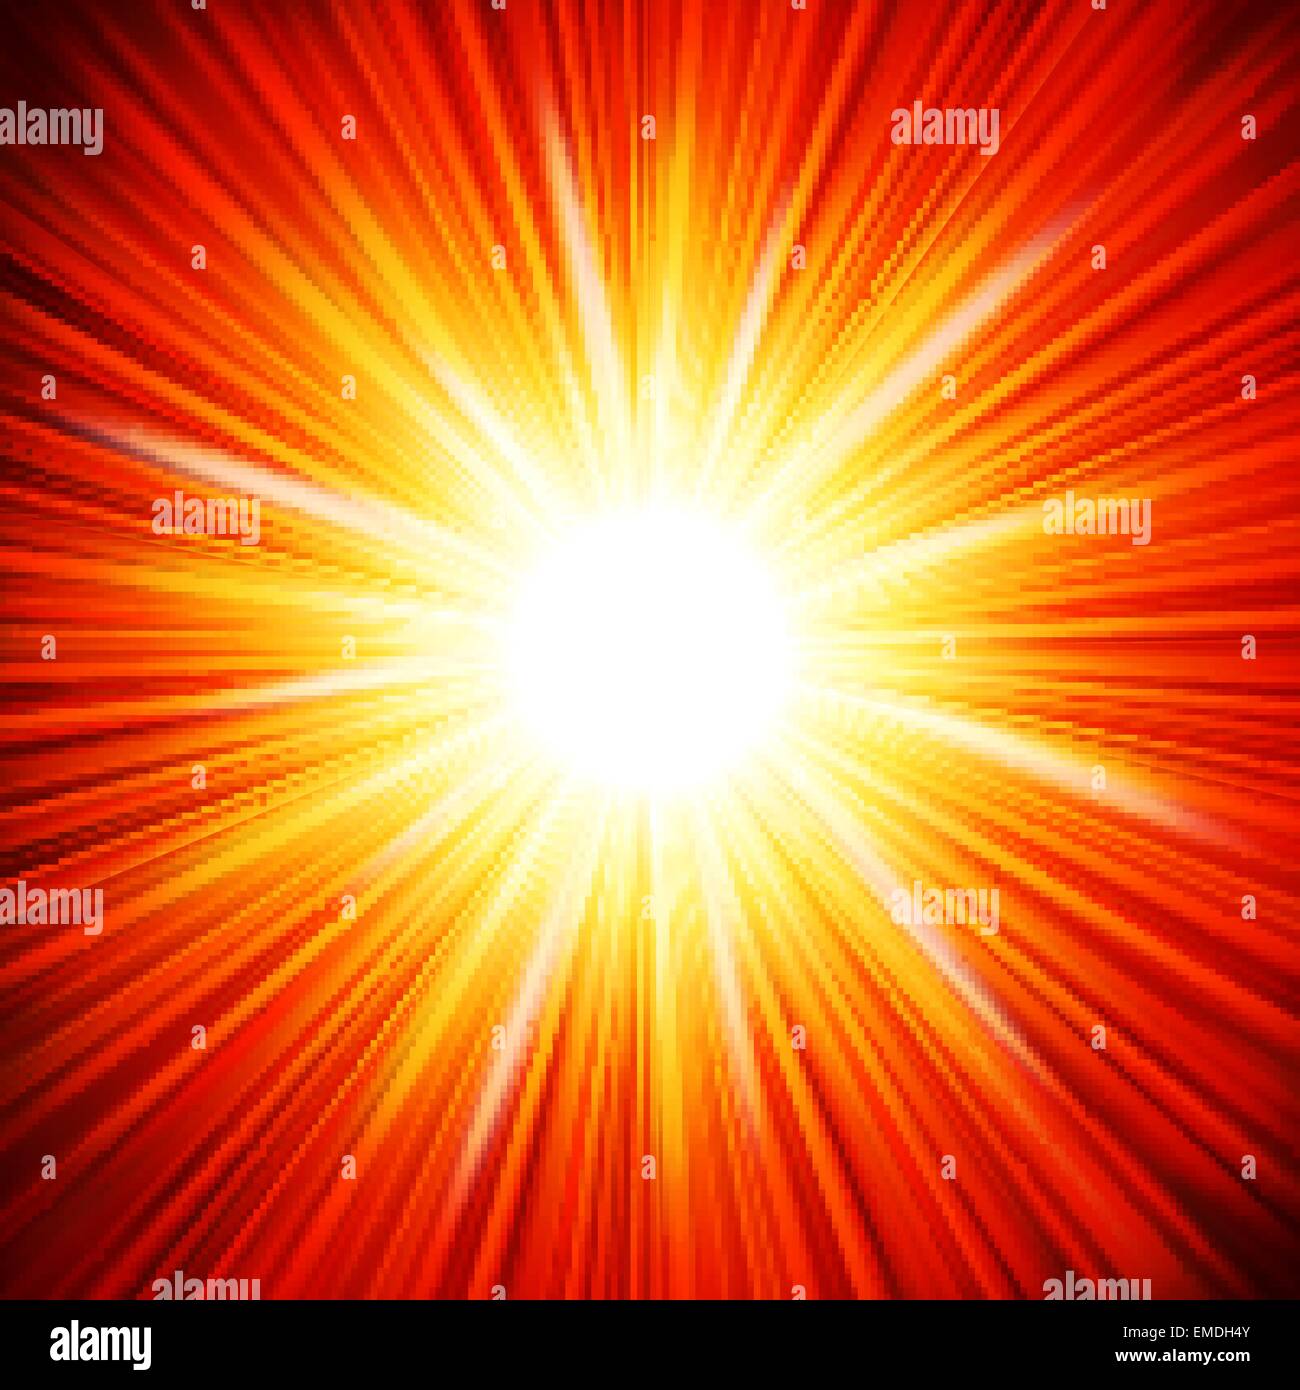 Star burst red and yellow fire. EPS 10 Stock Vector